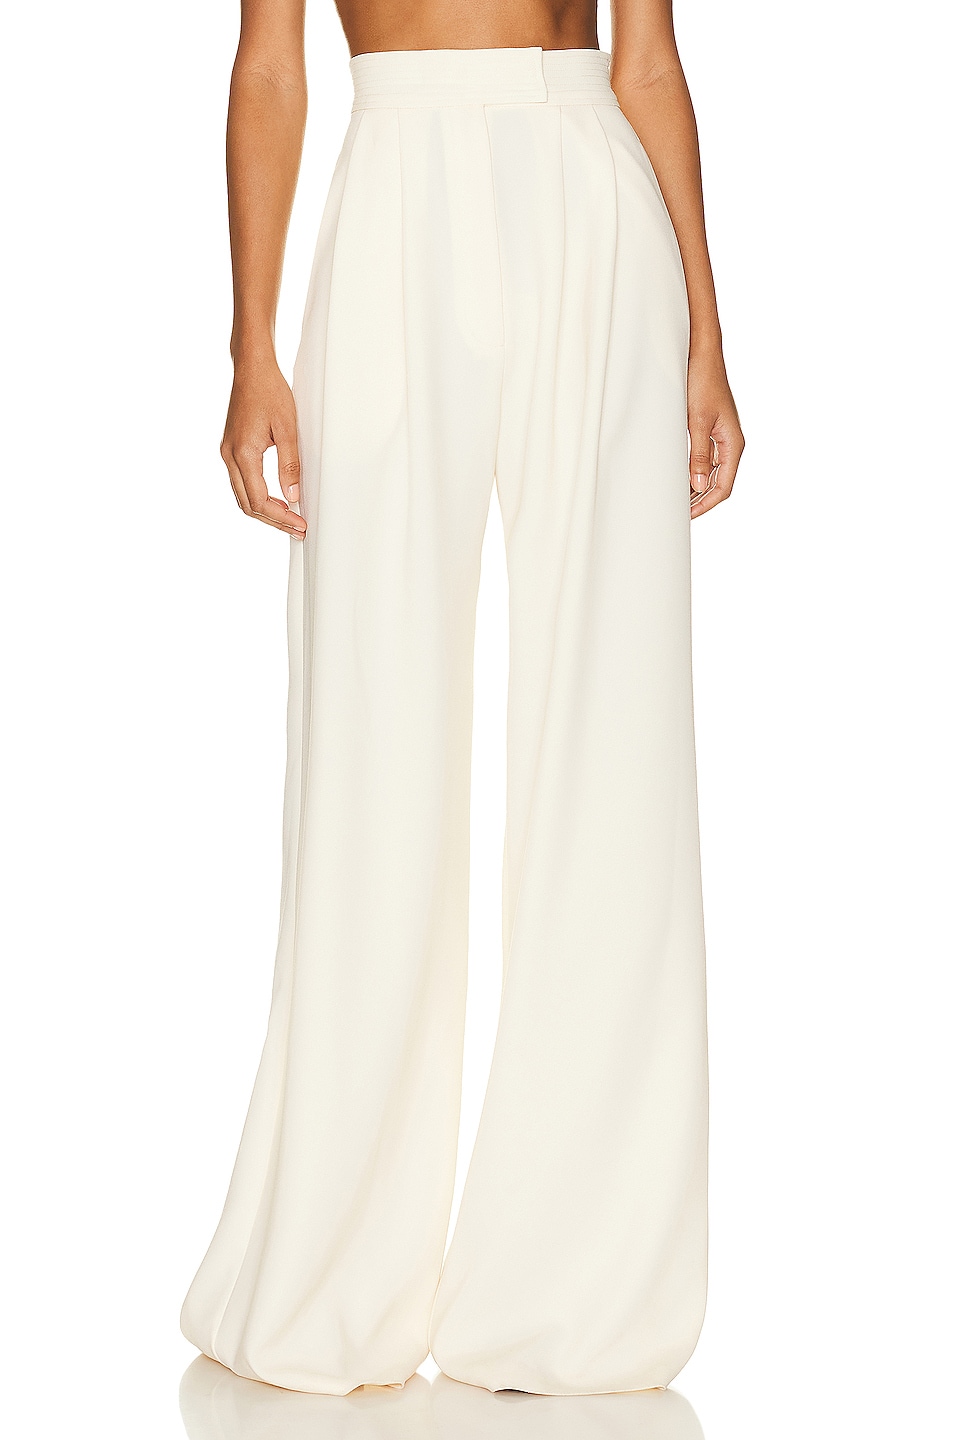 Image 1 of Alex Perry Harlan Wide Leg Pant in Cream